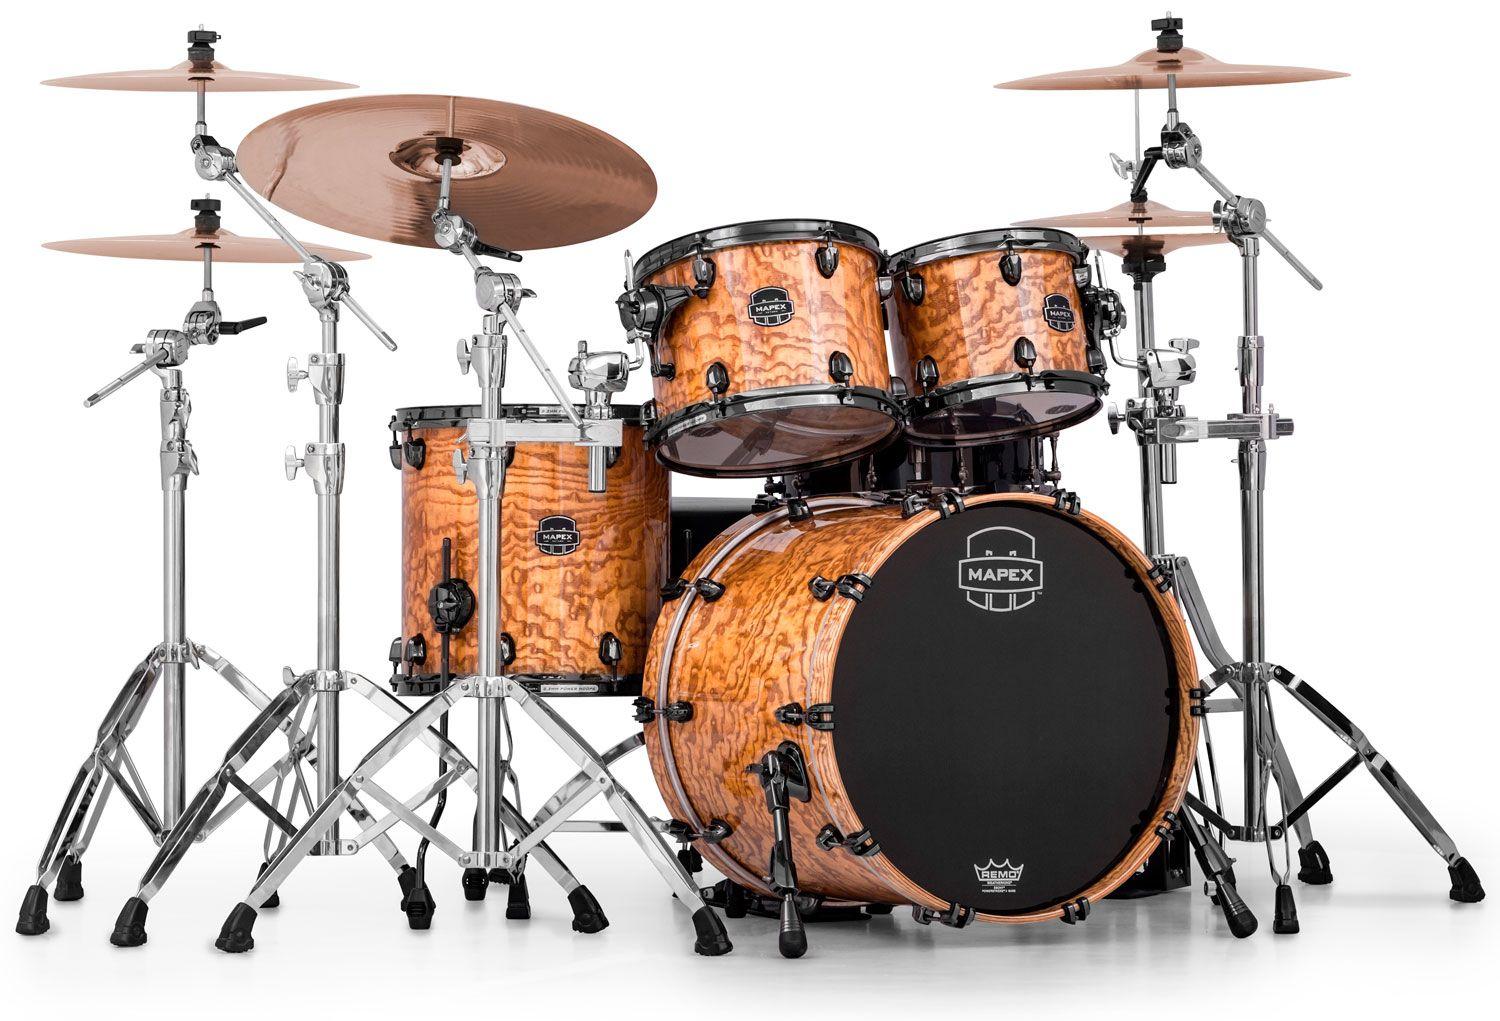 High Quality Drum Set Wallpaper. Full HD Picture